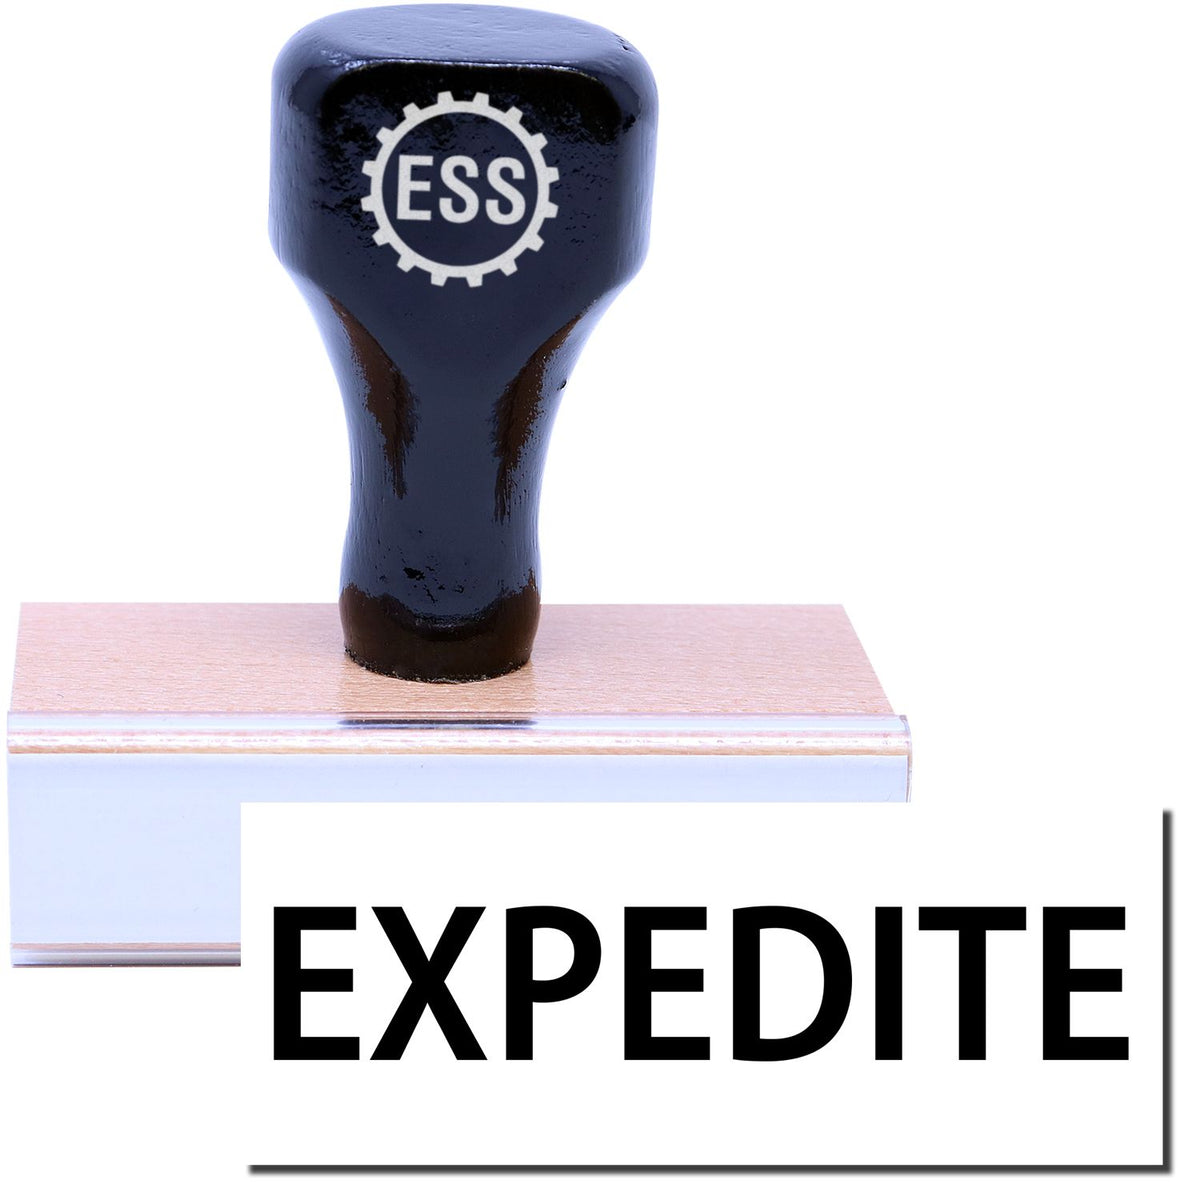 A stock office rubber stamp with a stamped image showing how the text &quot;EXPEDITE&quot; is displayed after stamping.